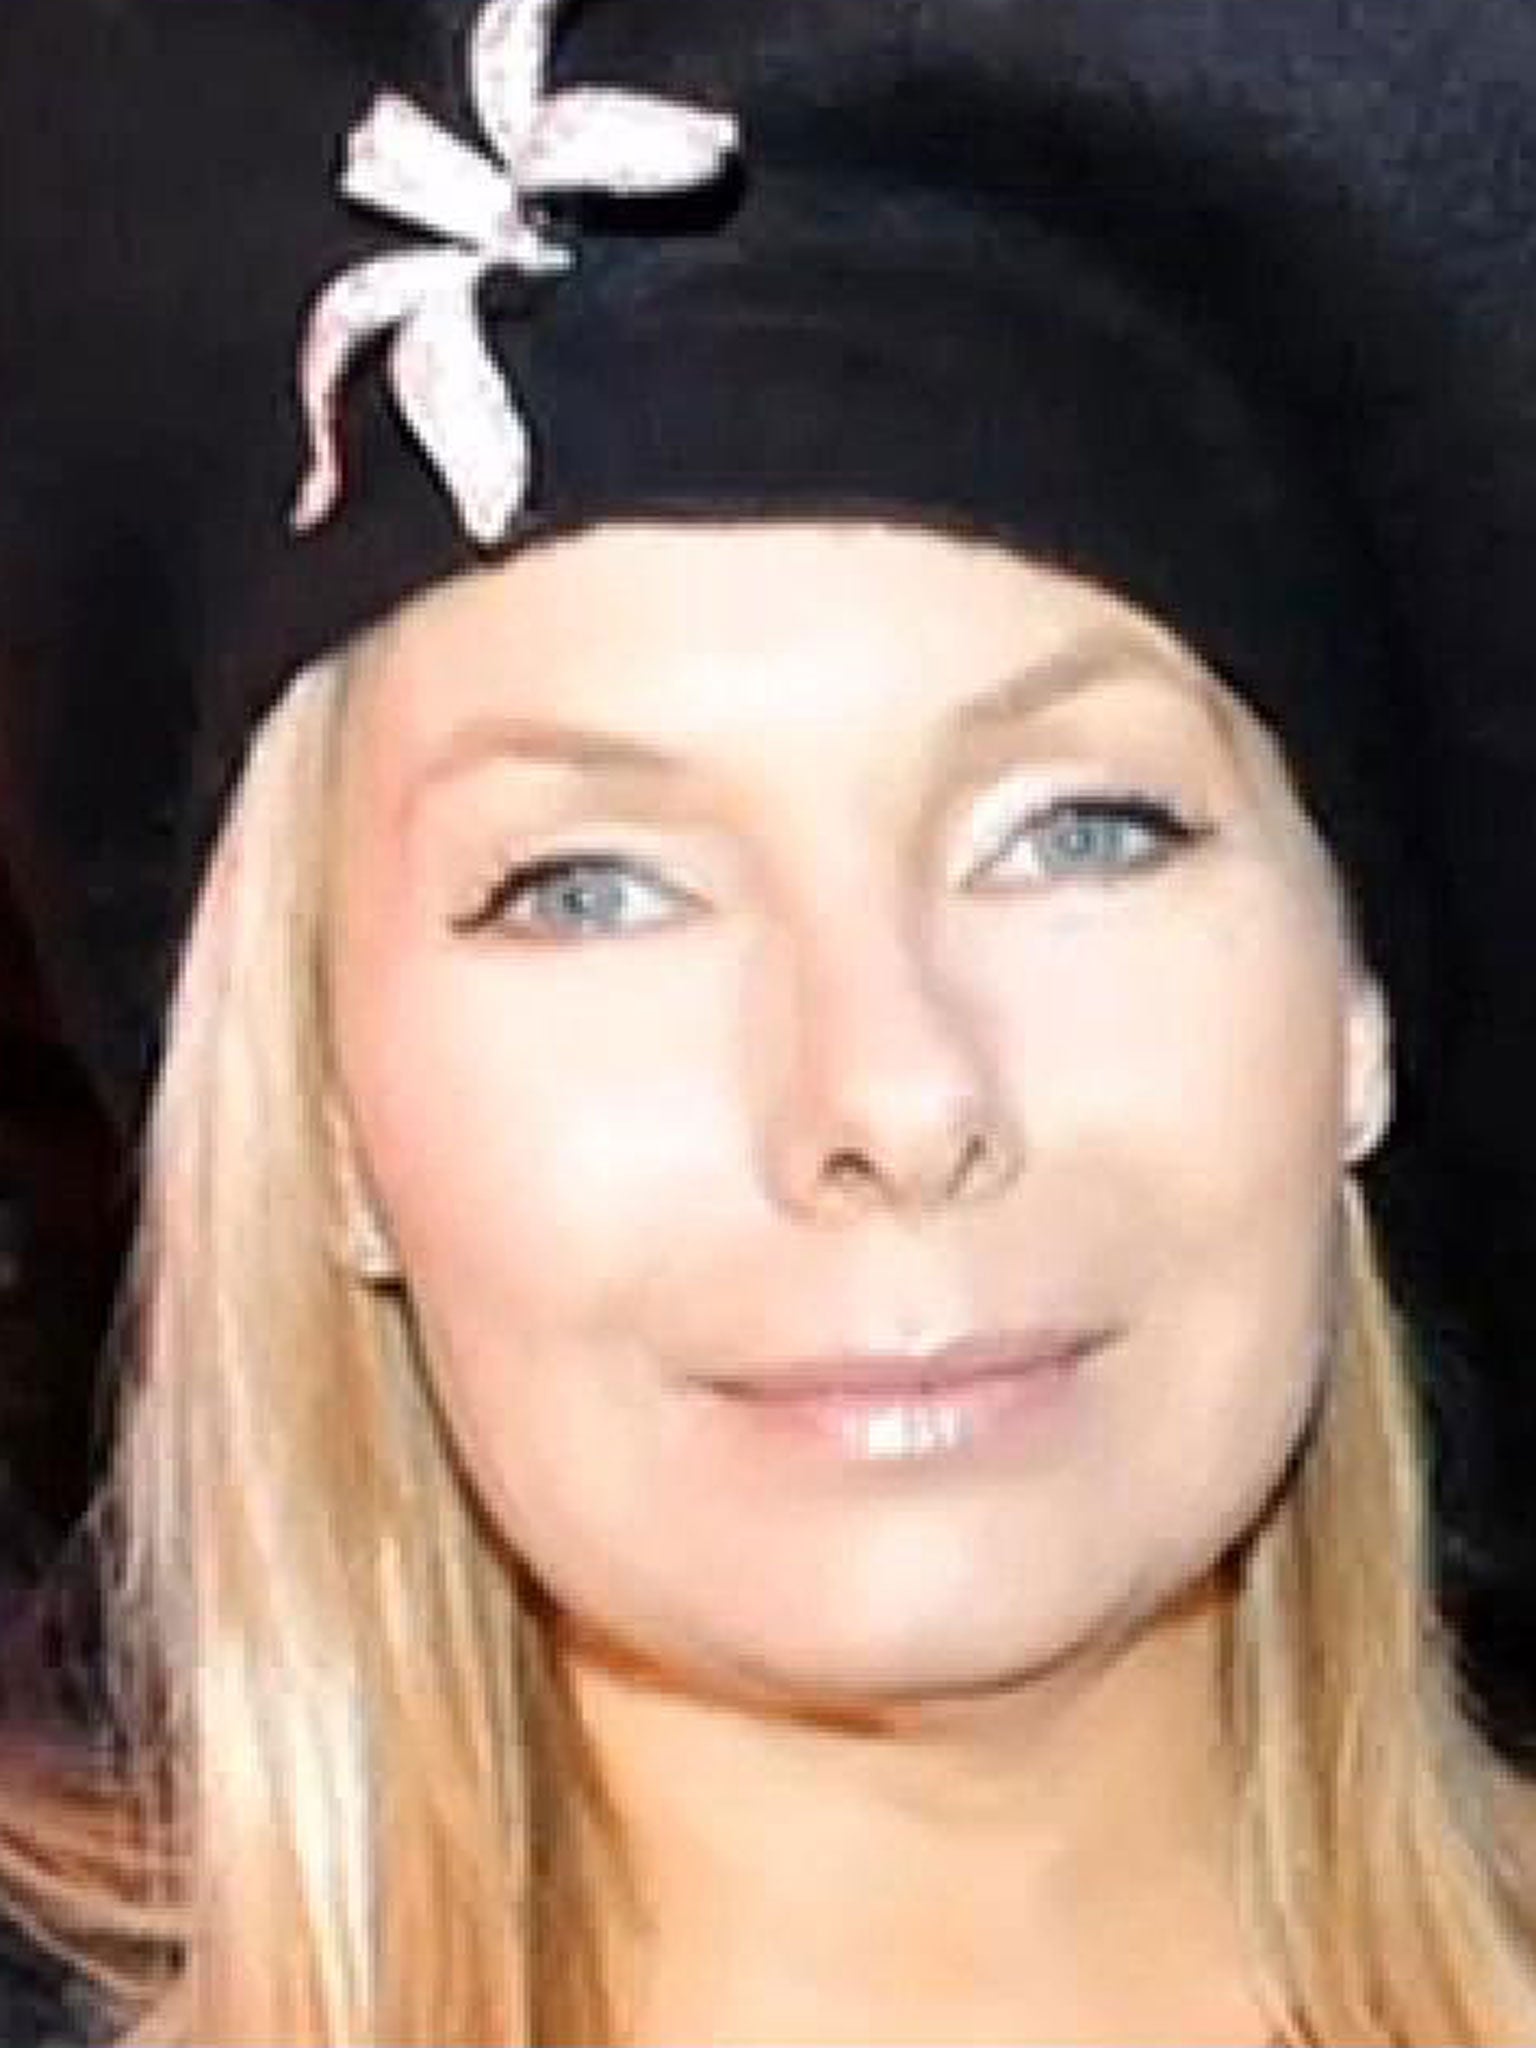 Sandra D'Auriol is understood to have jumped from her death after undergoing plastic surgery the day before